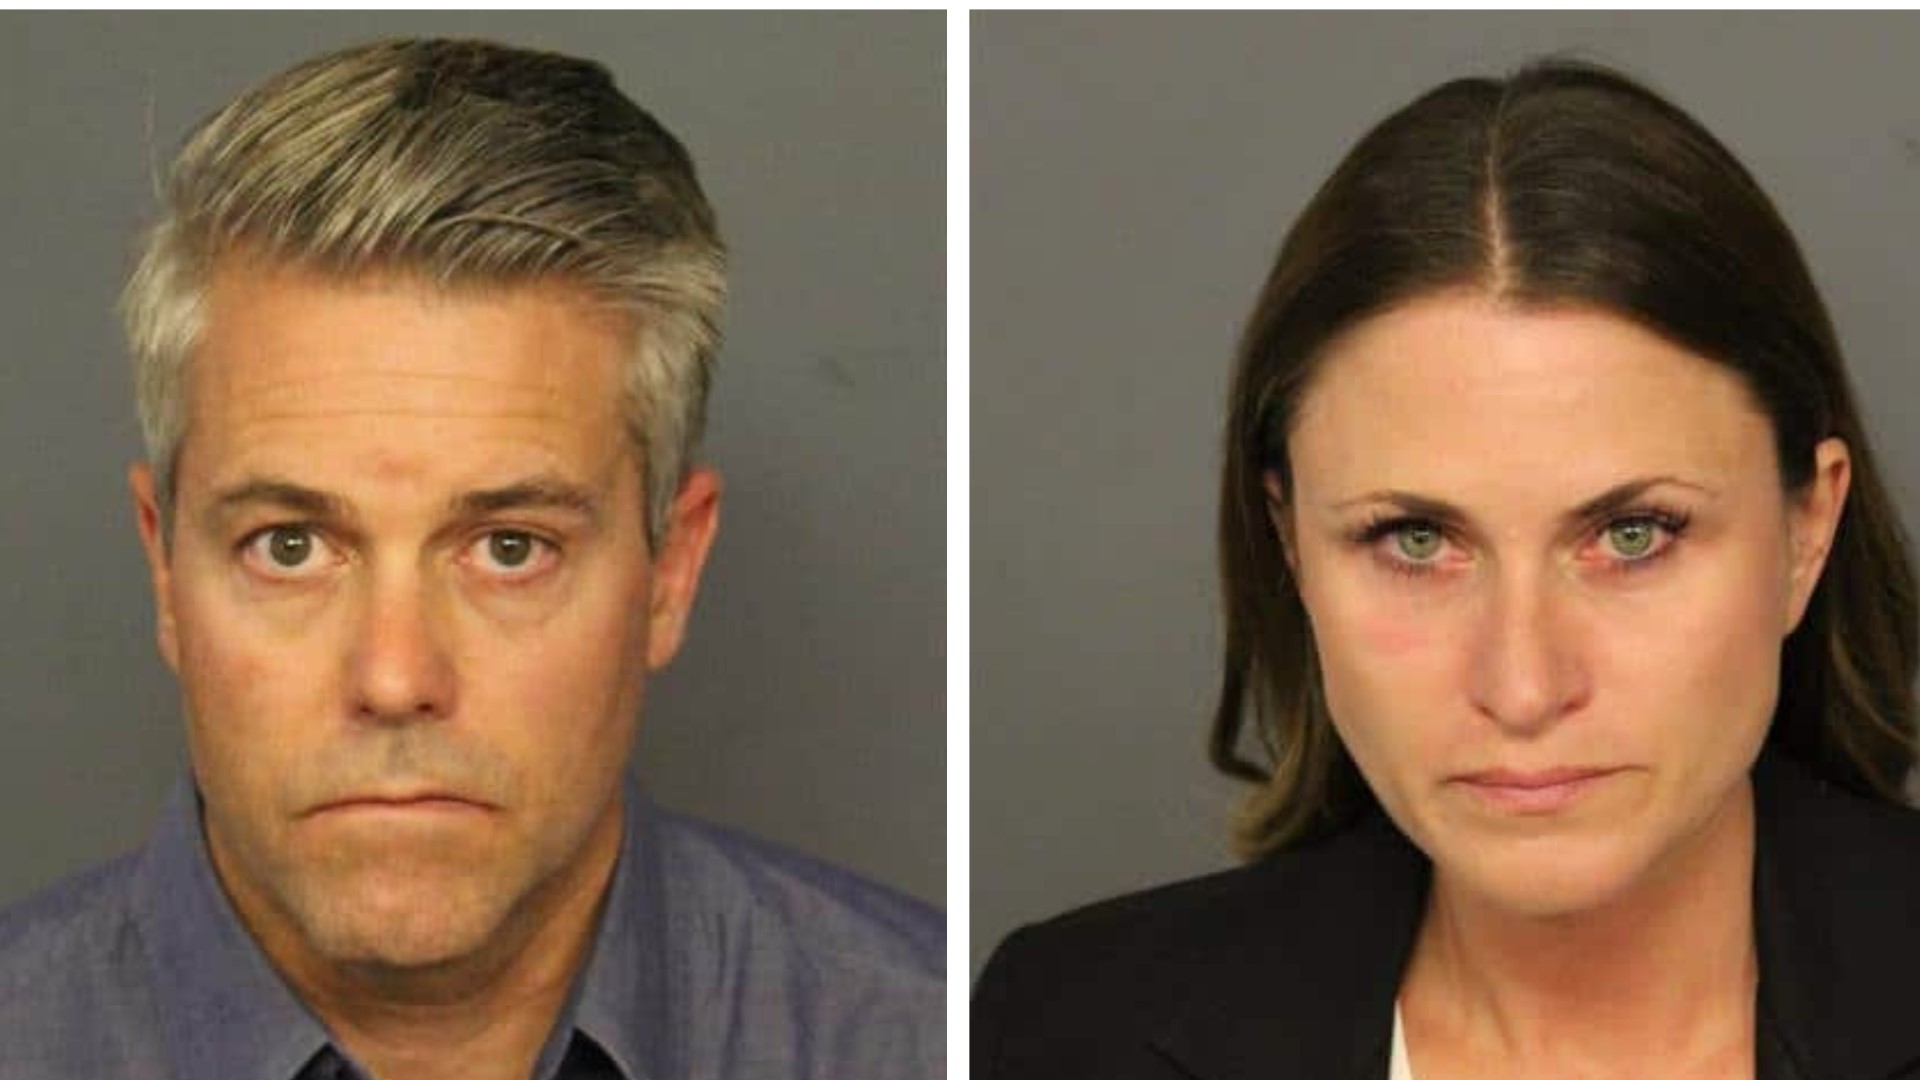 Alexander and Stacy Neir are accused of illegally running a short-term rental business at two locations that were not their primary residence.